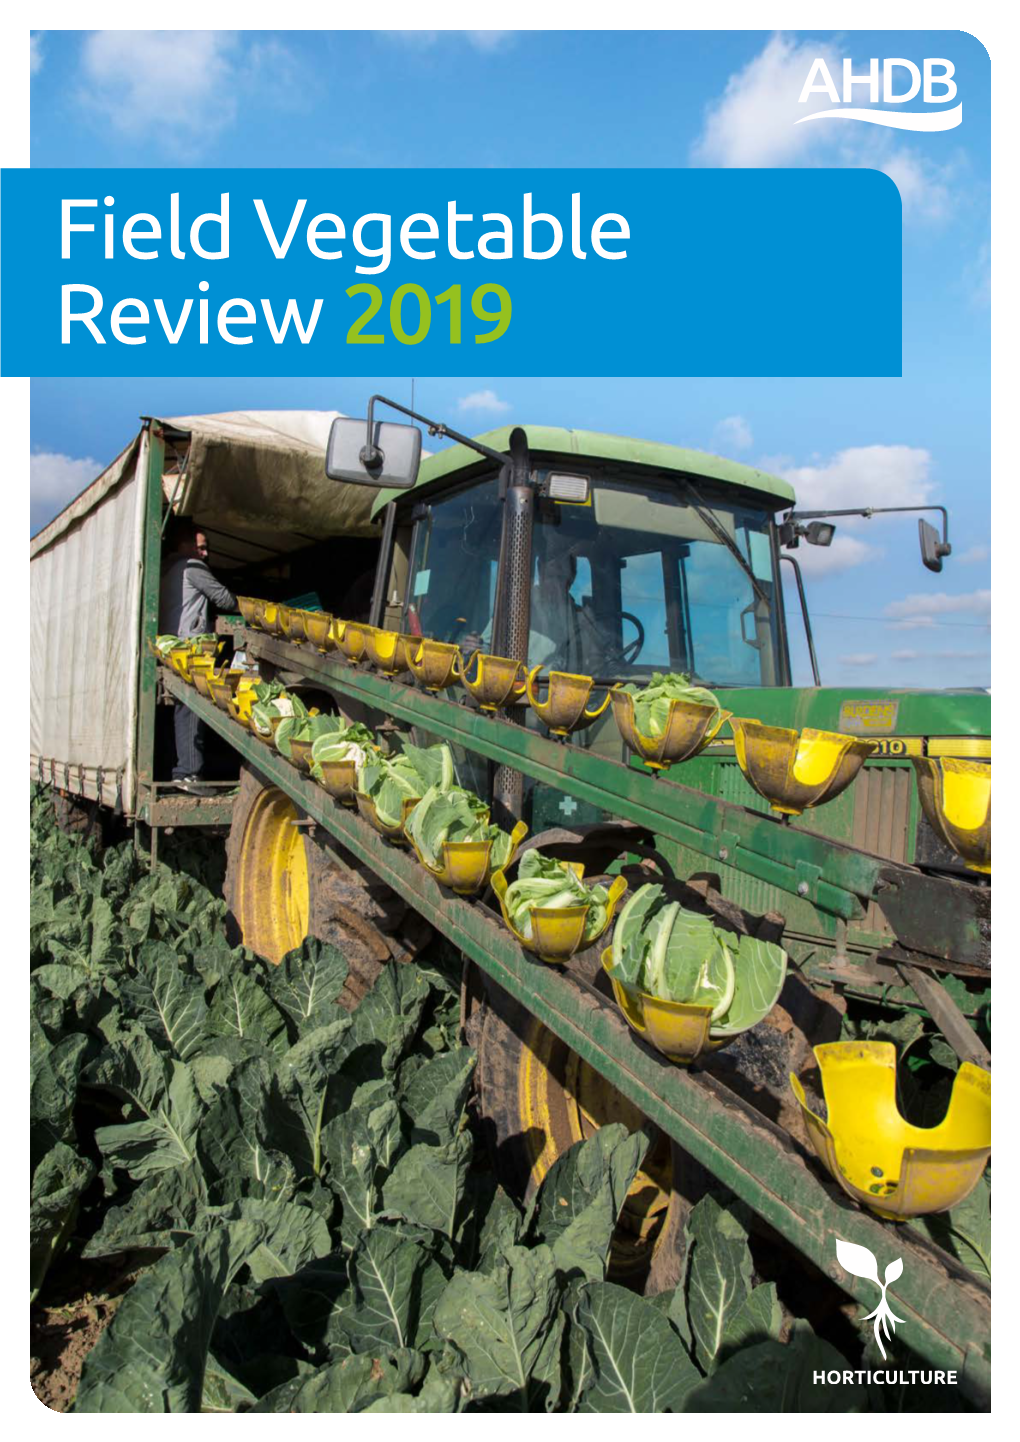 Field Vegetable Review 2019 Contents